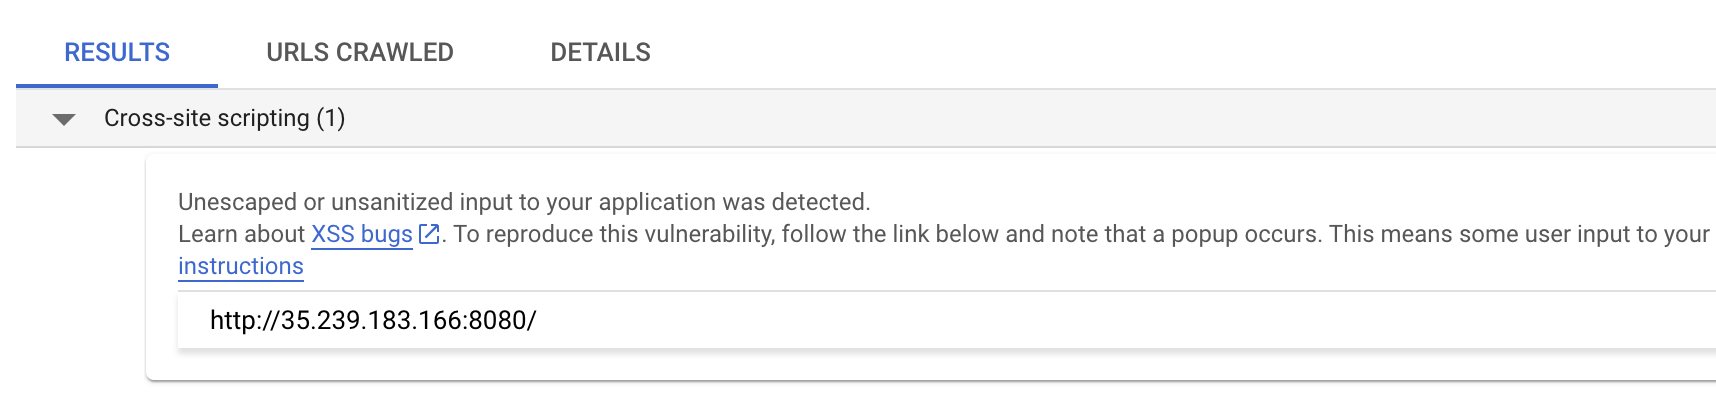 Web Security Scanner results with vulnerabilities